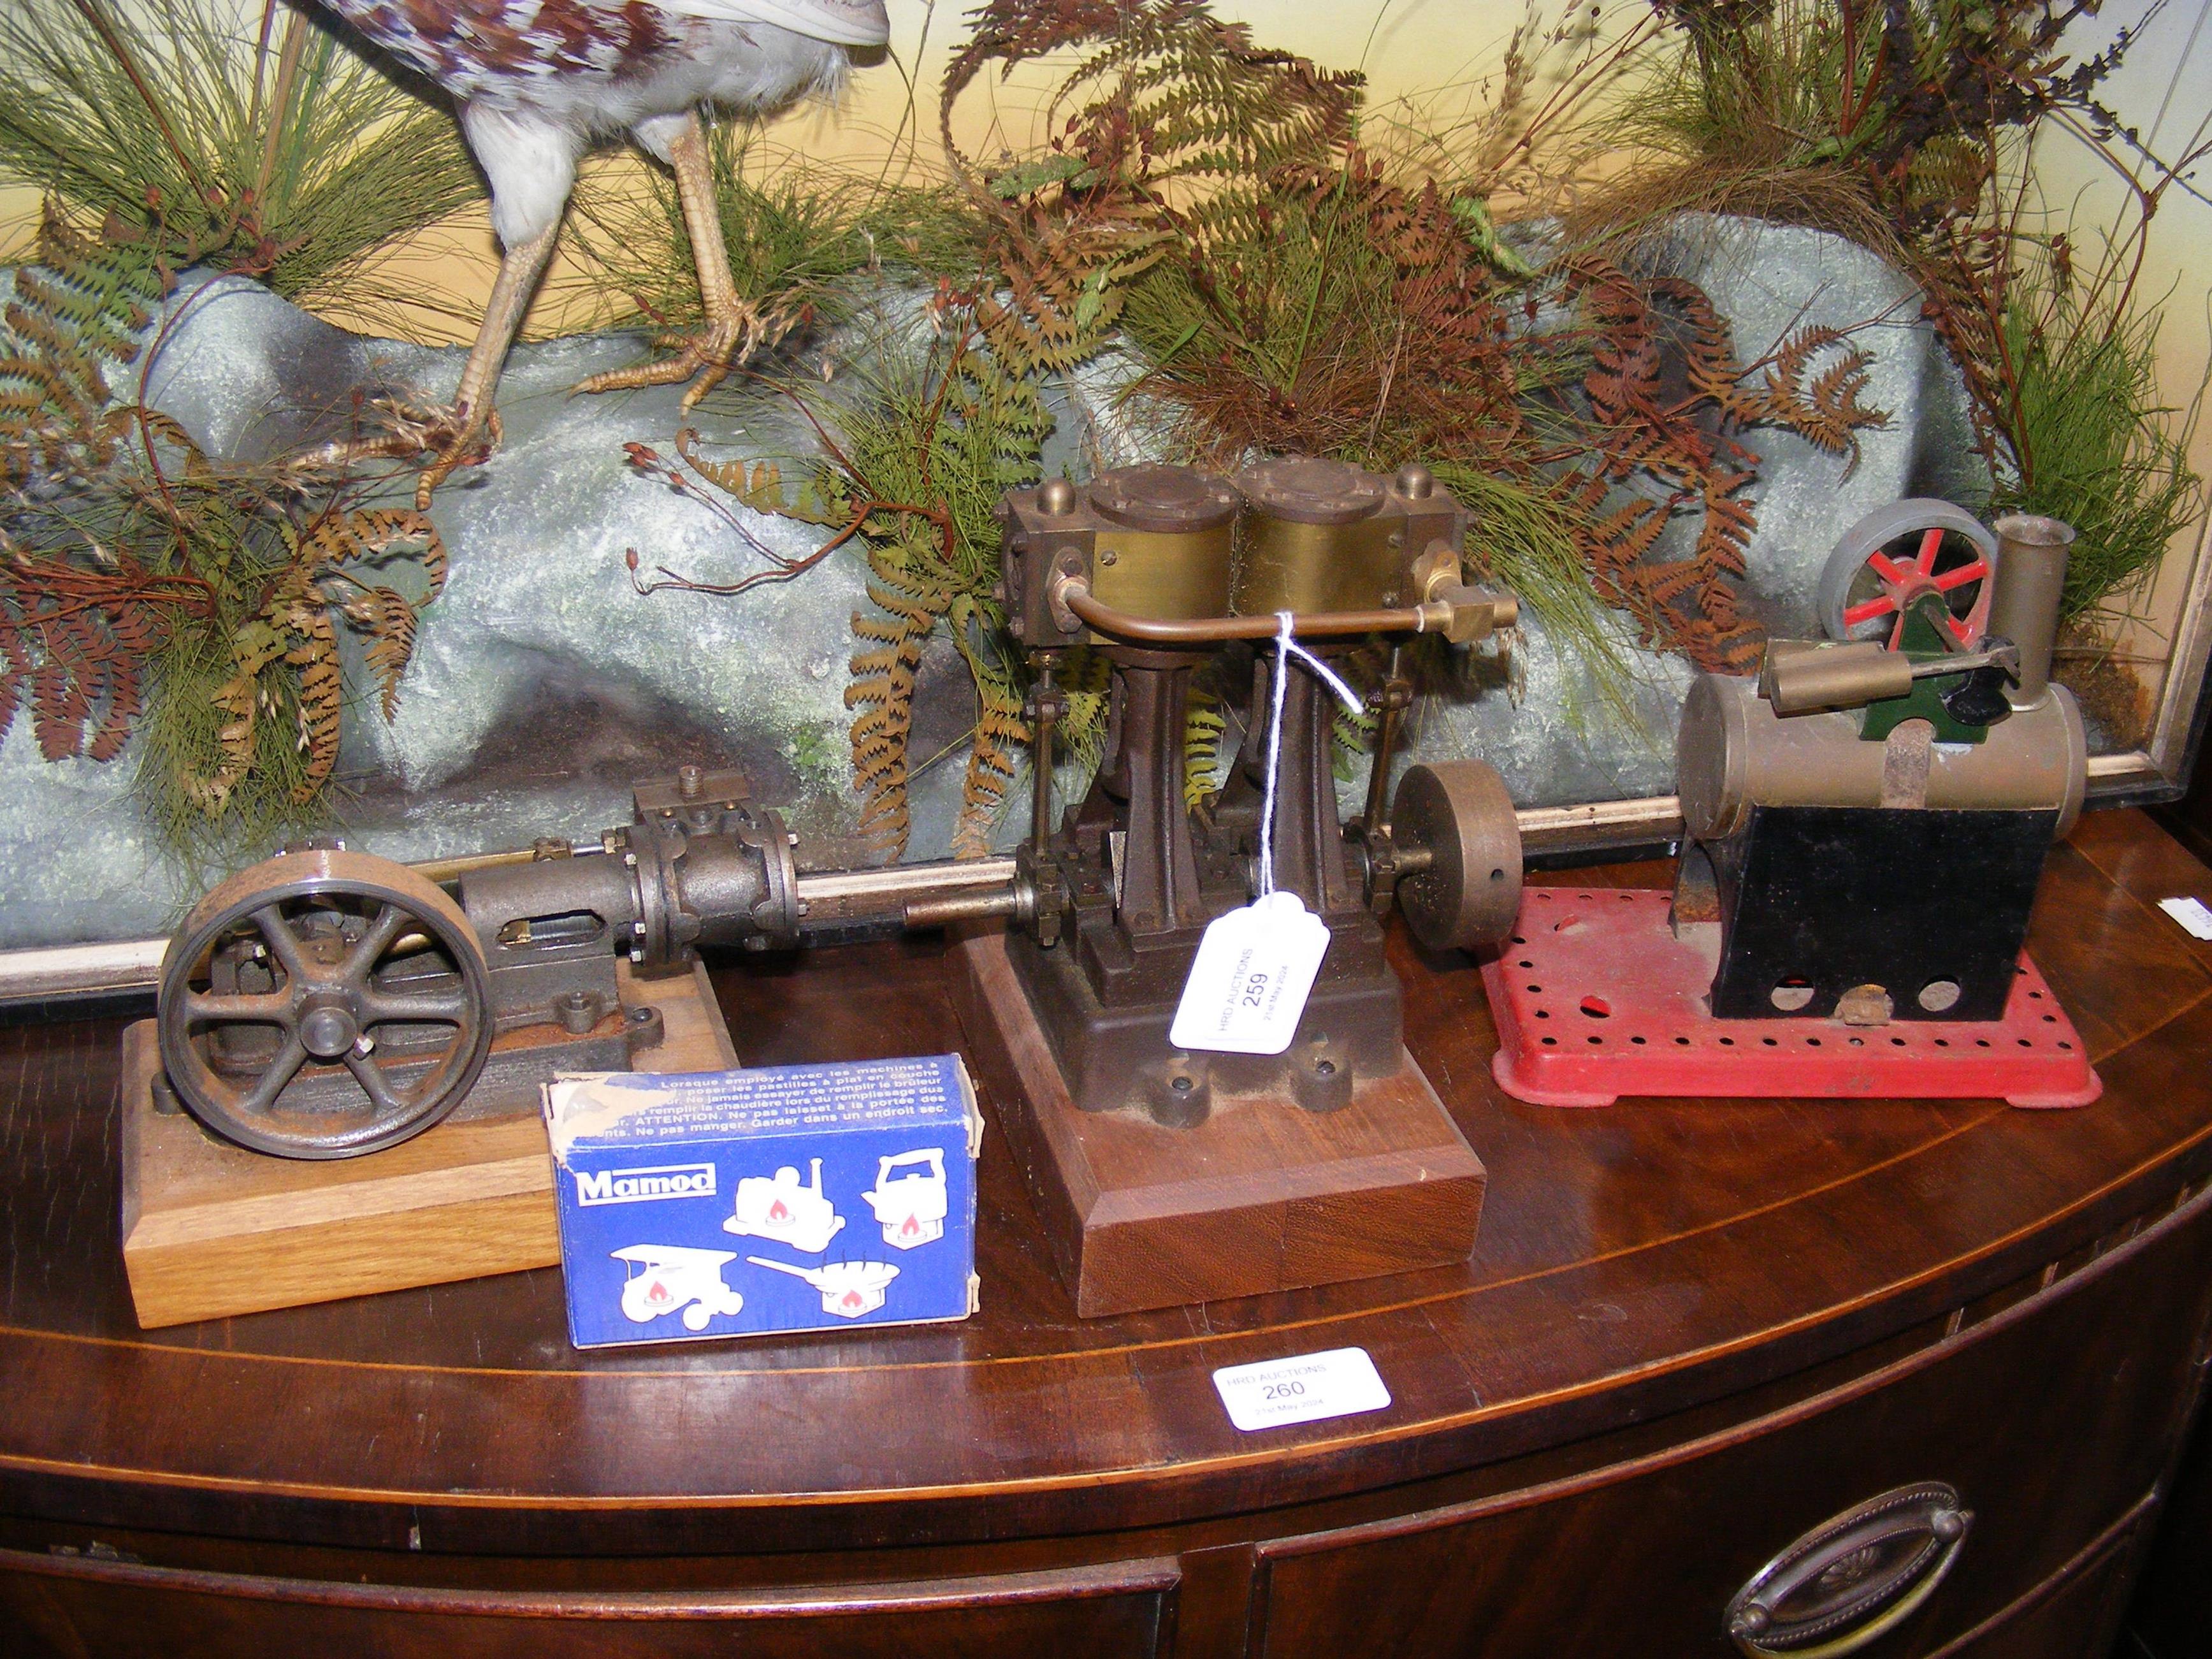 A Mamod style stationery steam engine together wit